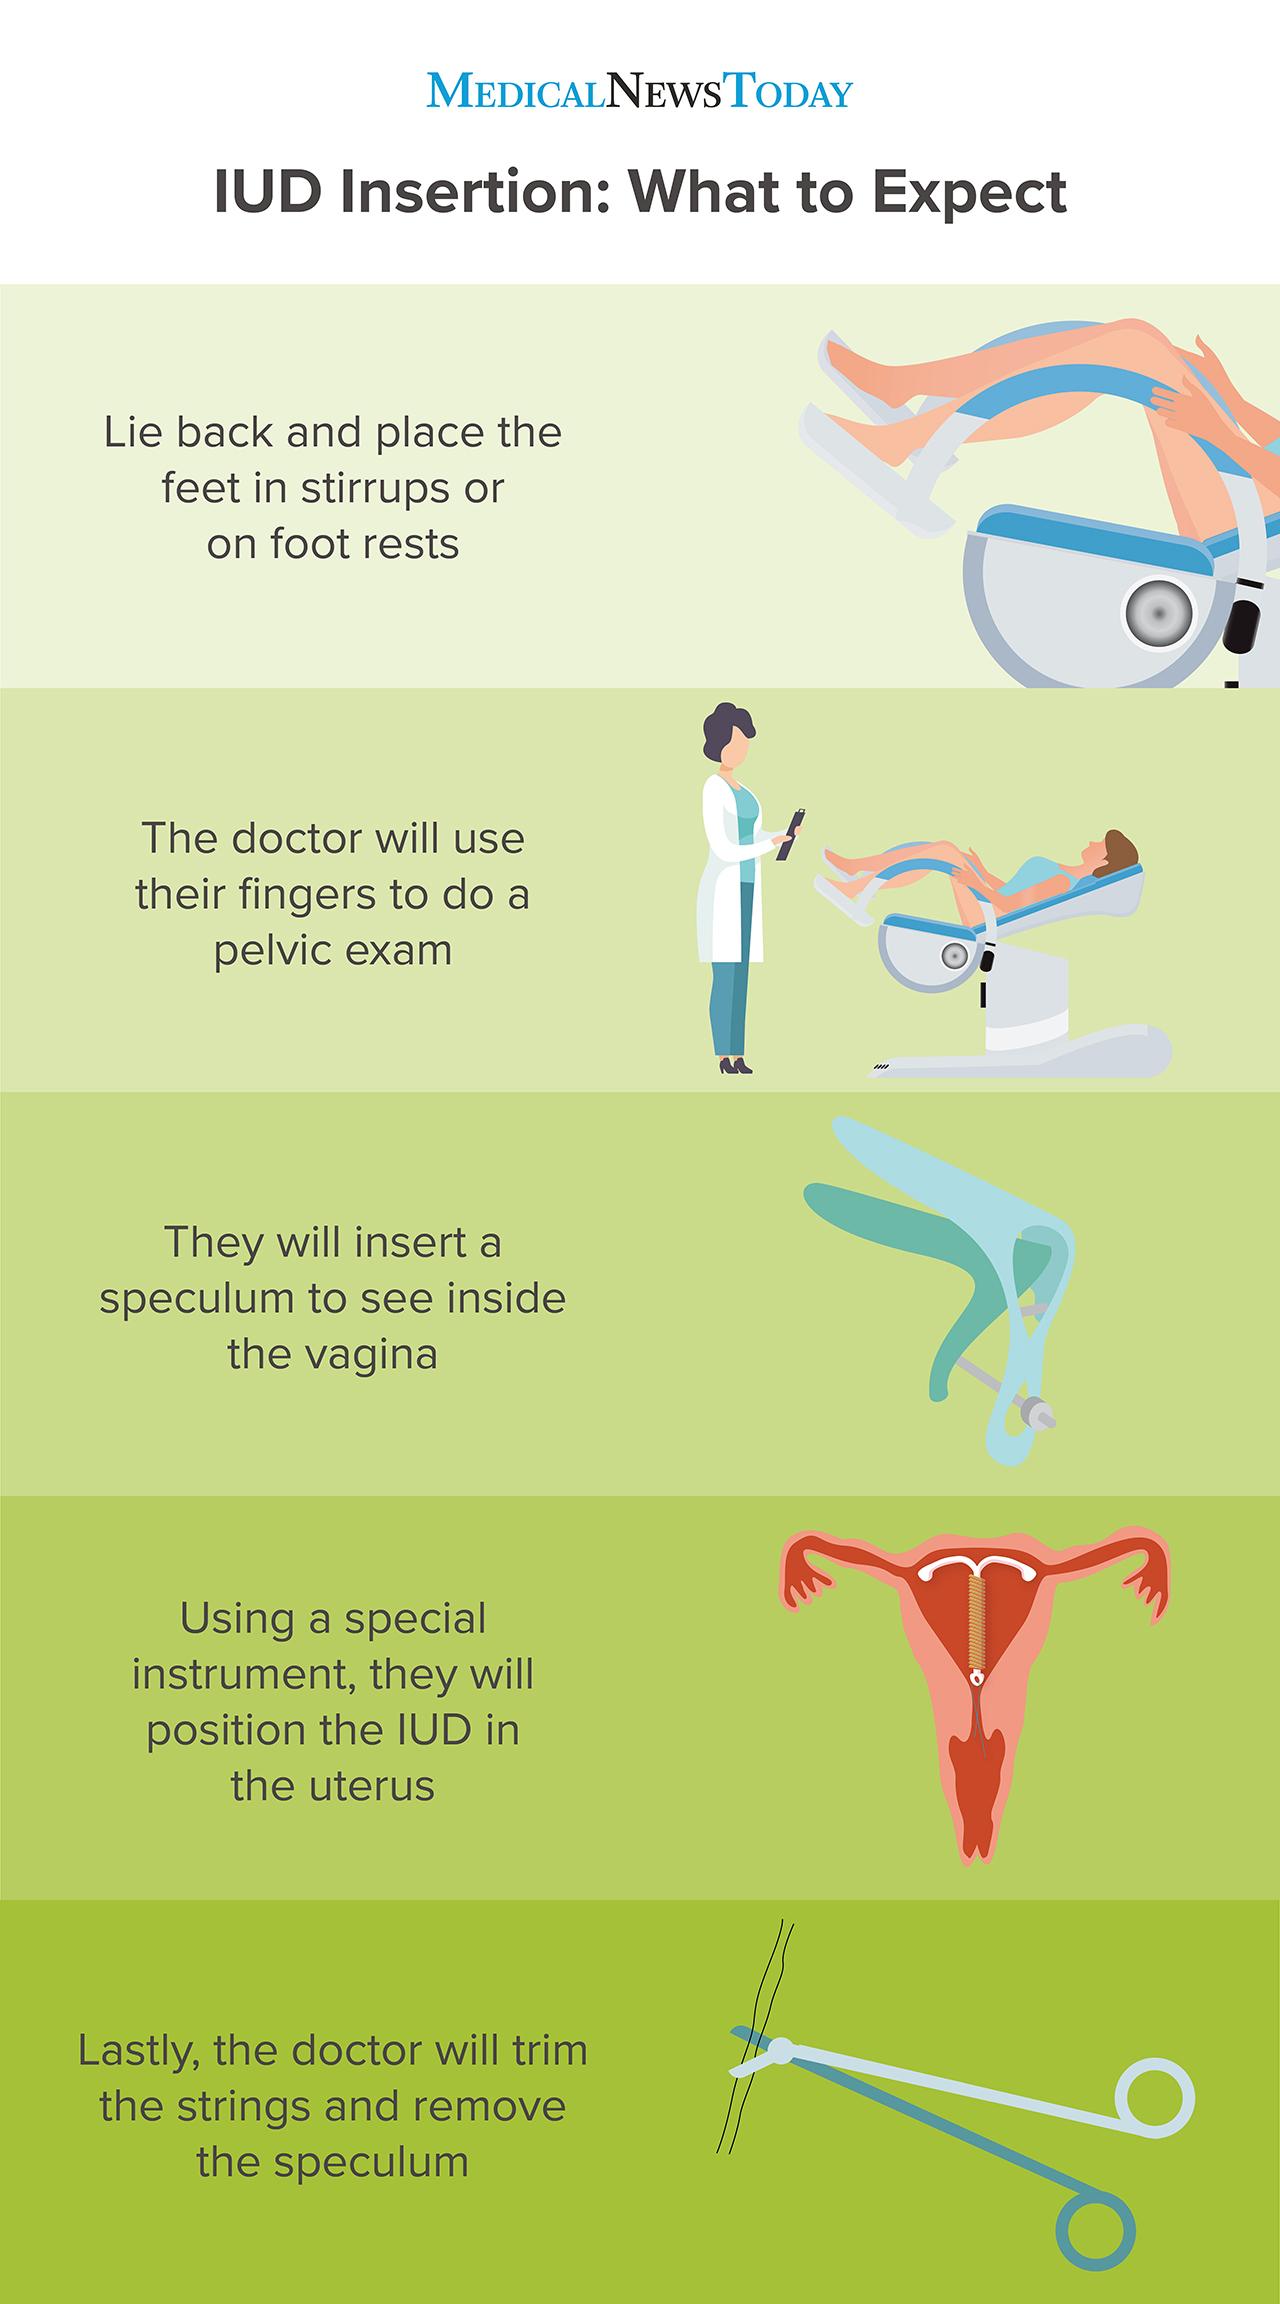 IUD insertion - what to expect infographic <br>Image credit: Stephen Kelly, 2019</br>